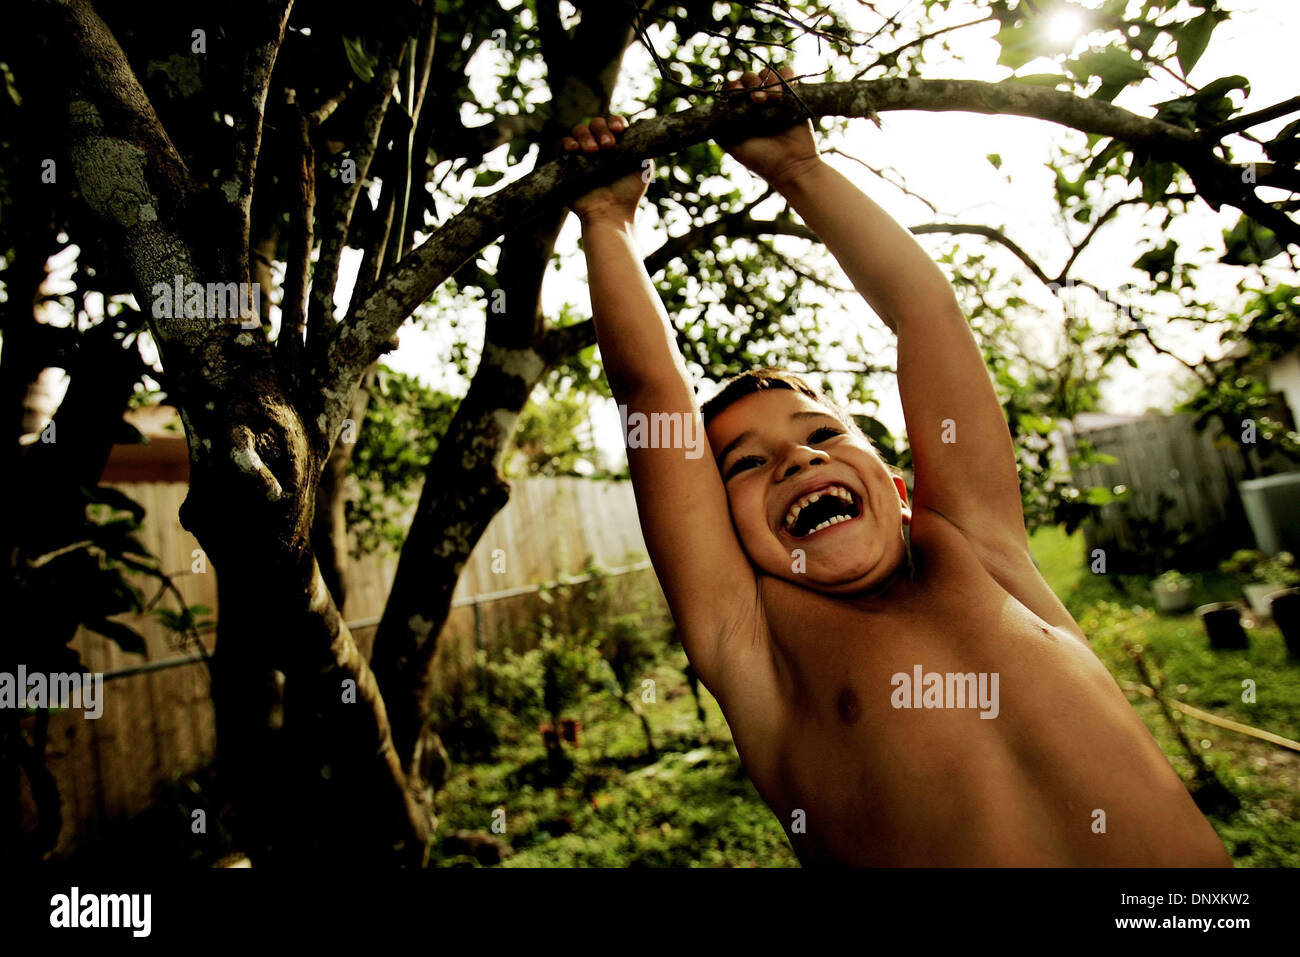 Dec 21, 2005; Indiantown, FL, USA; With a shriek of laughter, Bruno Ramirez, 6, swings from a tree at his house in Indiantown. With school being out for winter break, Bruno played outside with his family (siblings and a cousin) and a neighbor Wednesday afternoon. Though he spent part of the afternoon wrapped up in a blanket and complaining of being cold, once he was climbing trees, Stock Photo